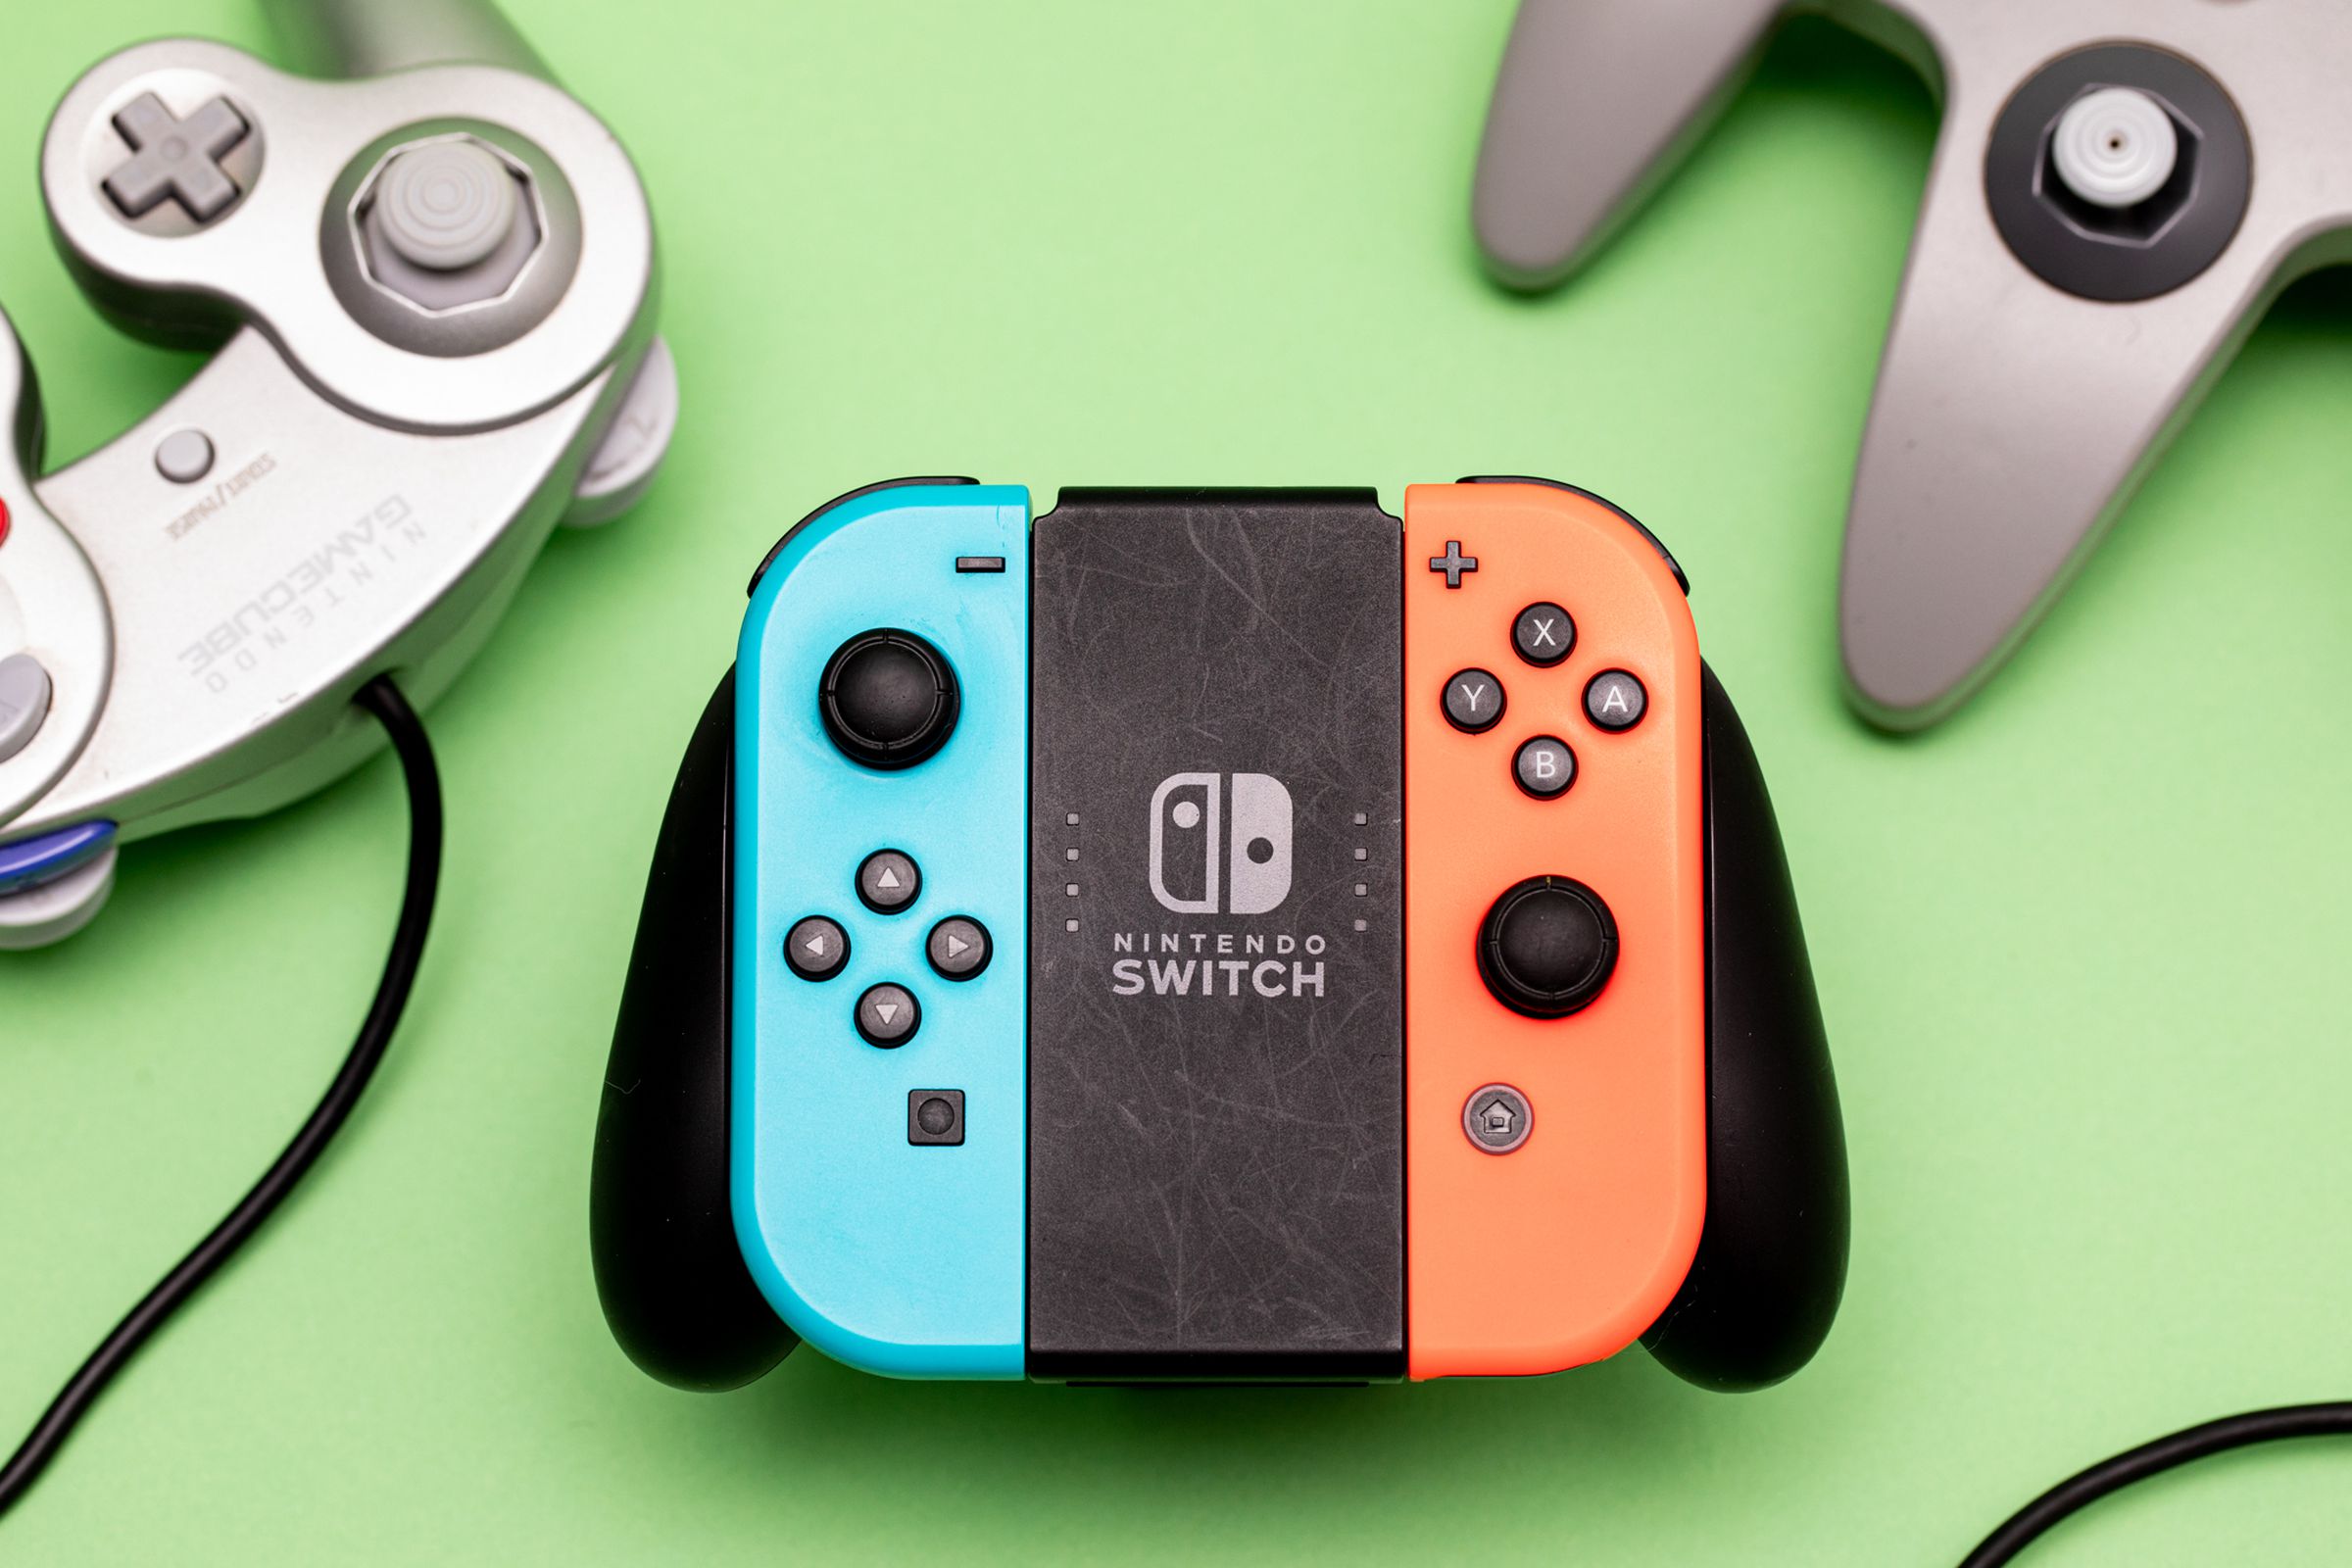 Image of Joy-Cons in a grip on a light green background surrounded by an N64 and GameCube controller.